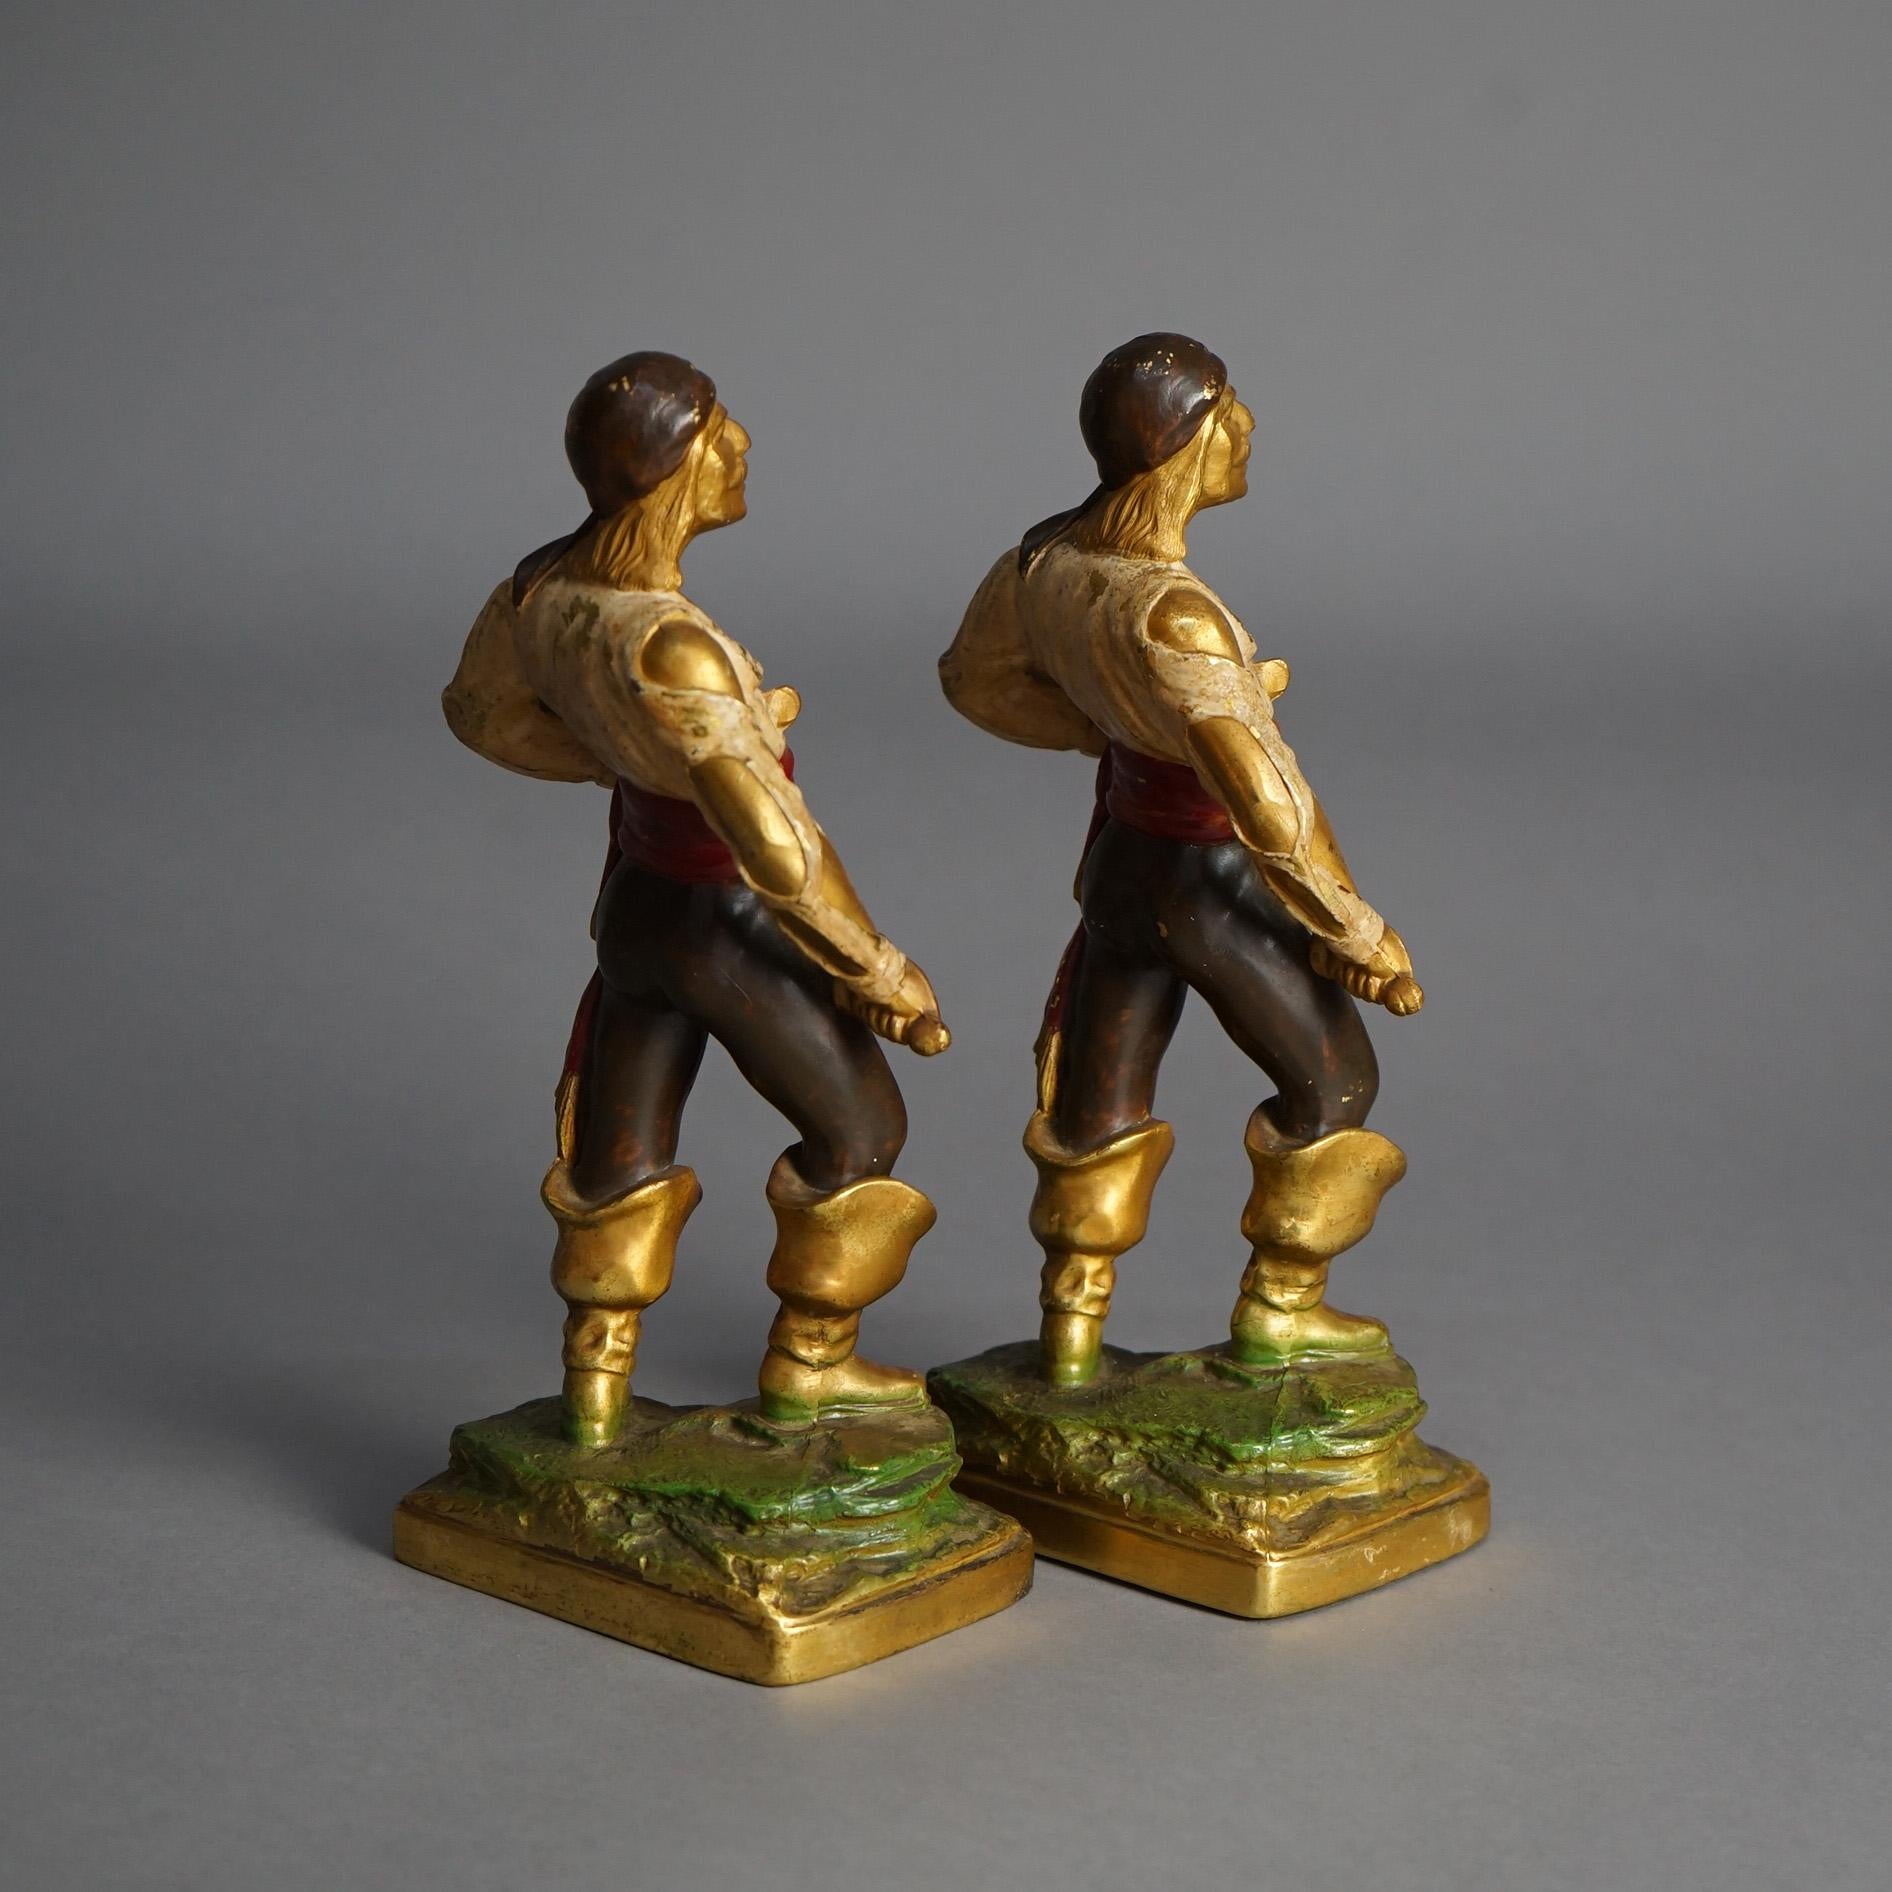 Antique Pair of Polychrome & Bronzed Cast Metal Pirate Figures Circa 1930 For Sale 1